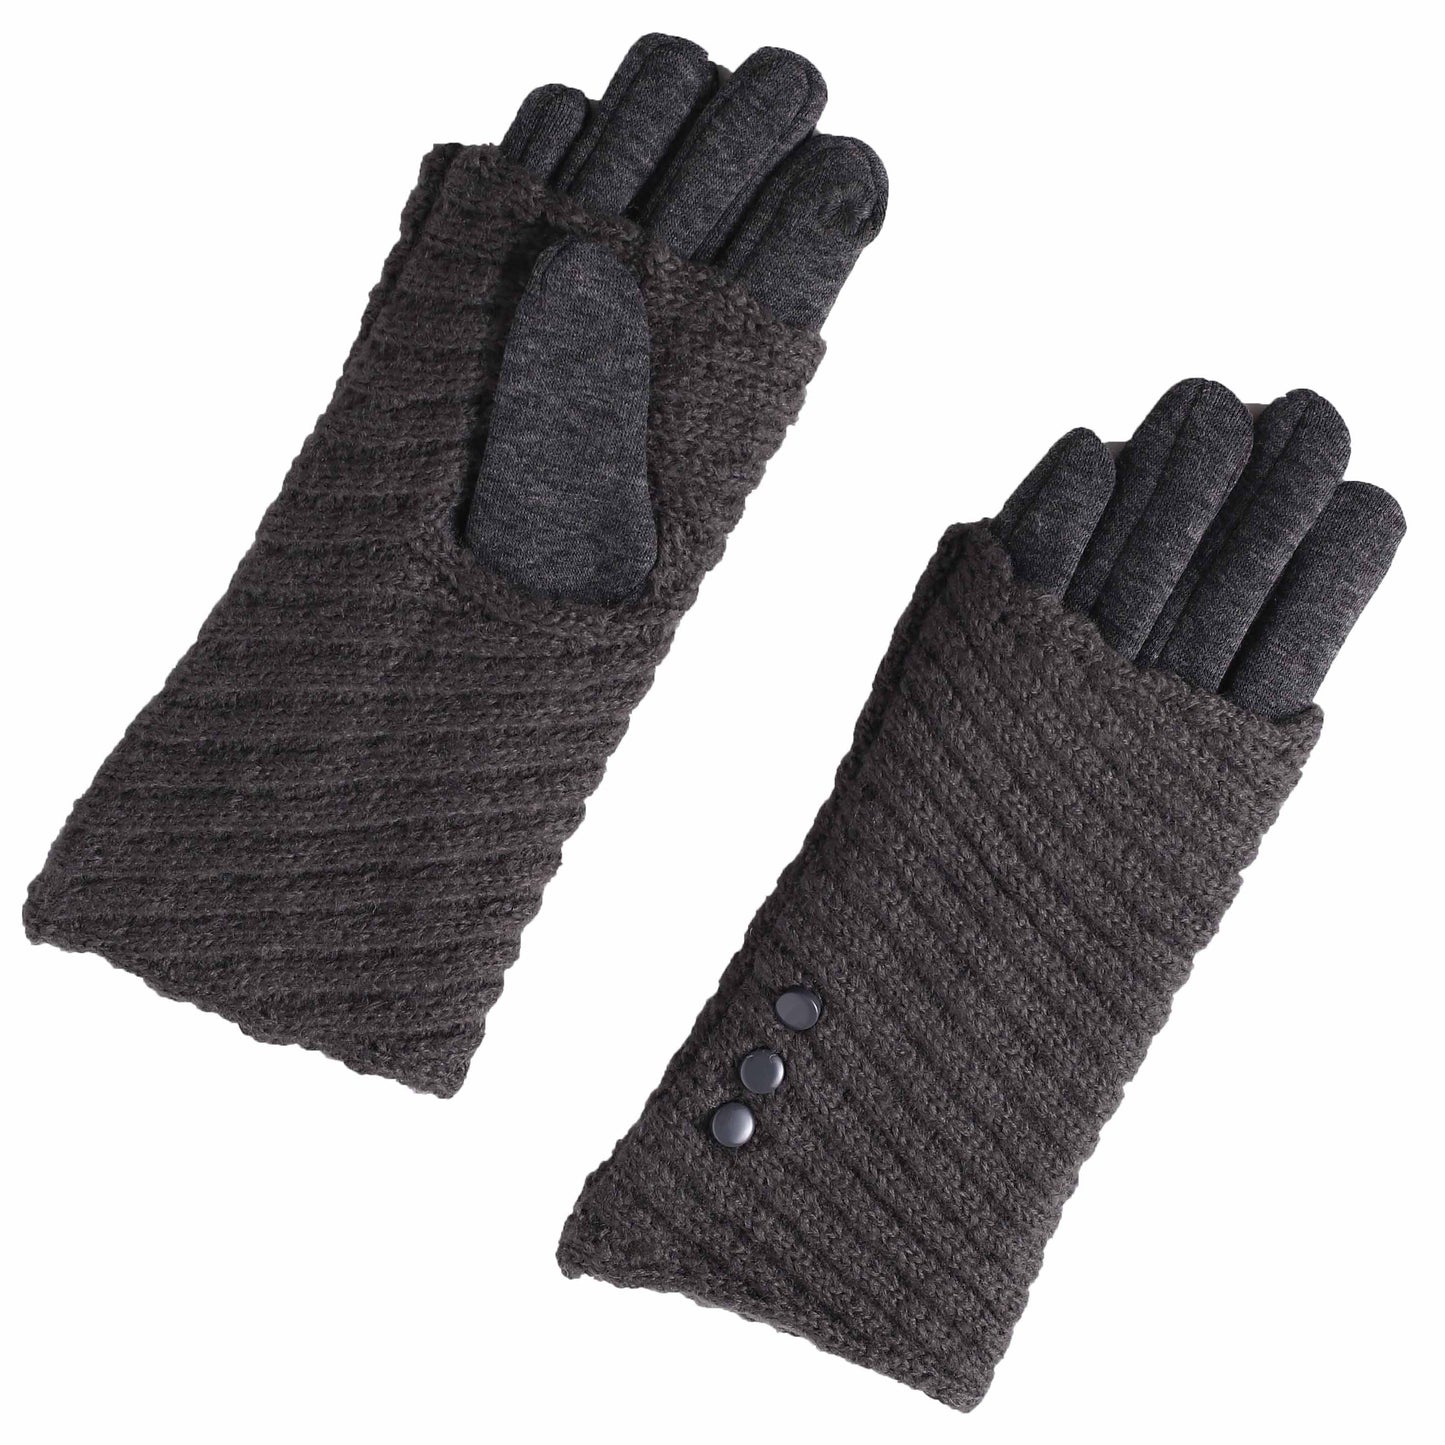 Inspire 2 in one gloves